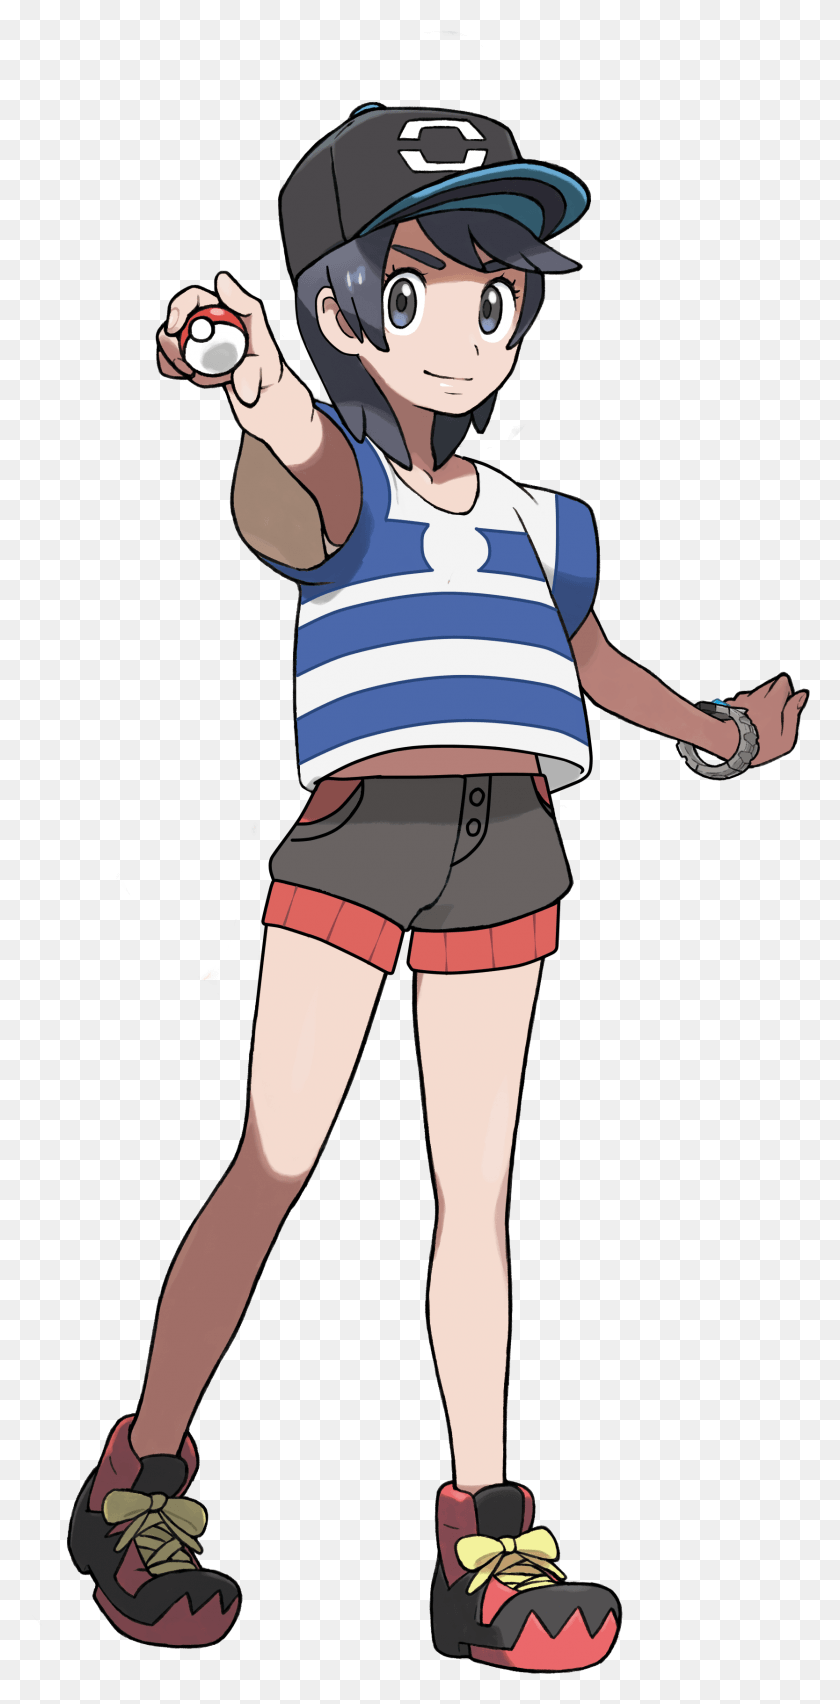 1667x3515 Genderbend Sun Pokemon Trainer Red Pokemon Red Trainers Pokemon Sun And Moon Team Skull Outfit, Одежда, Одежда, Шорты Png Скачать